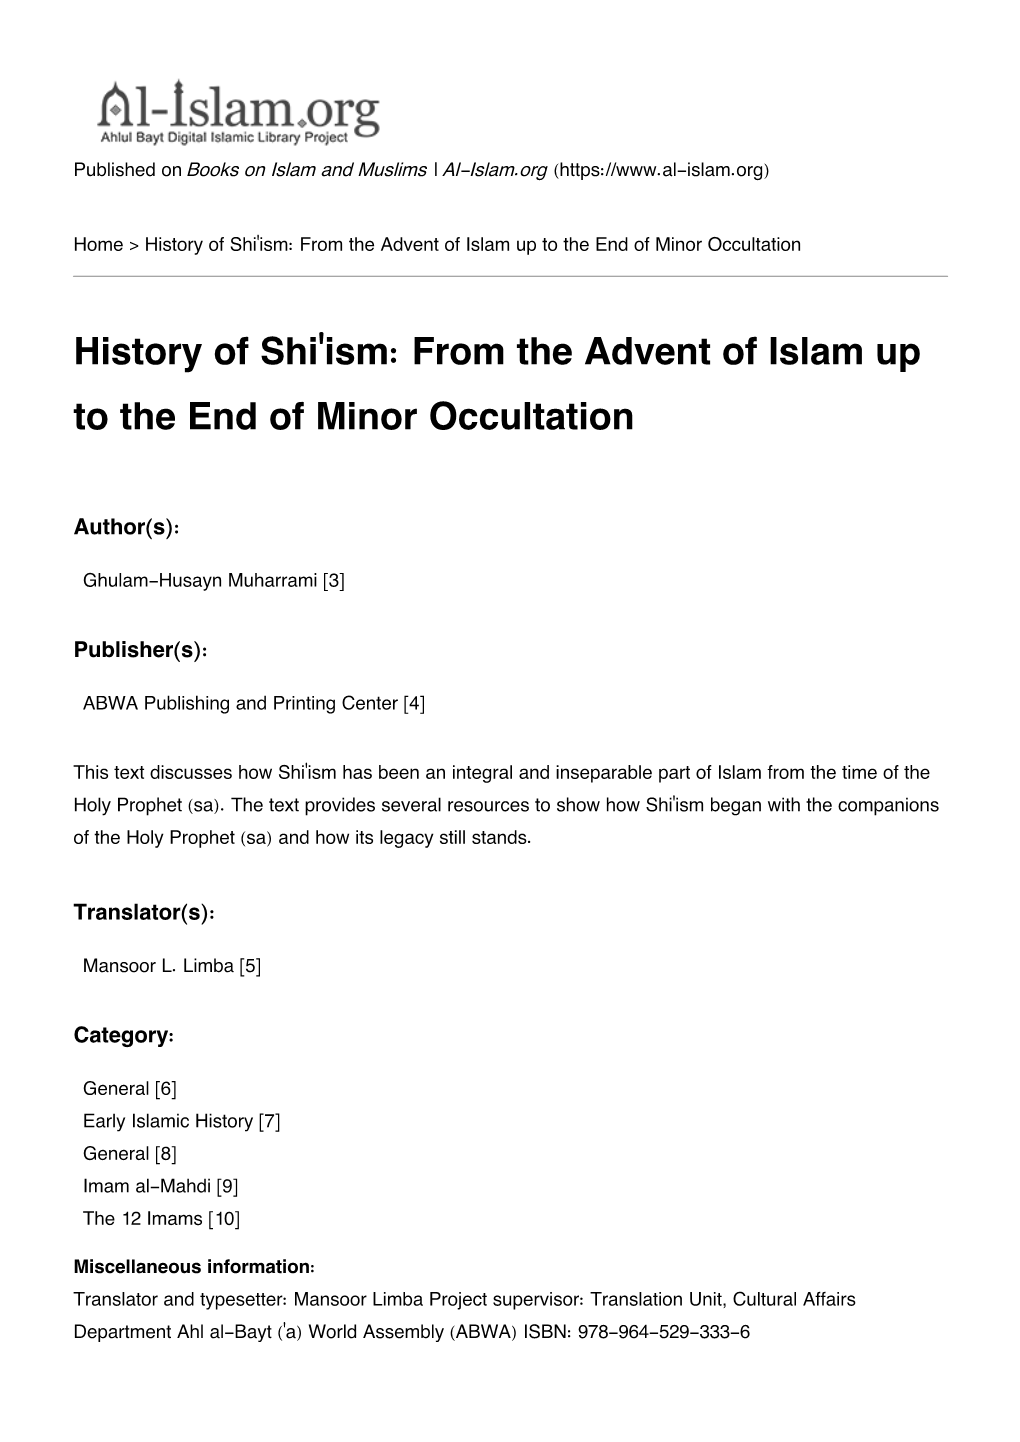 From the Advent of Islam up to the End of Minor Occultation